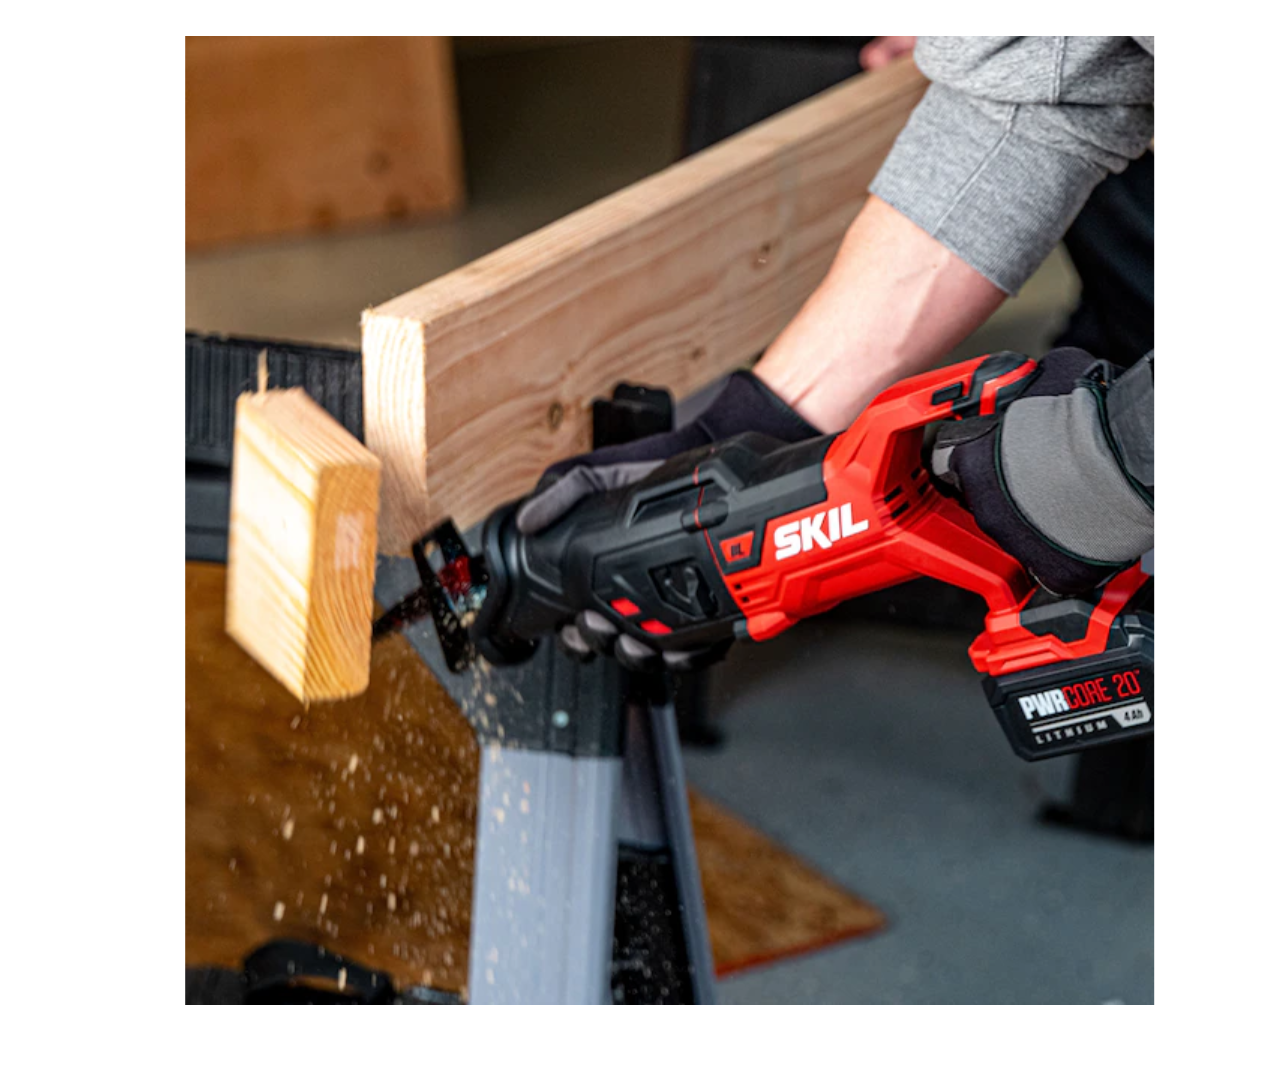 SKIL PWRCore 20 Brushless 20V Reciprocating Saw Kit RS5884-1A from